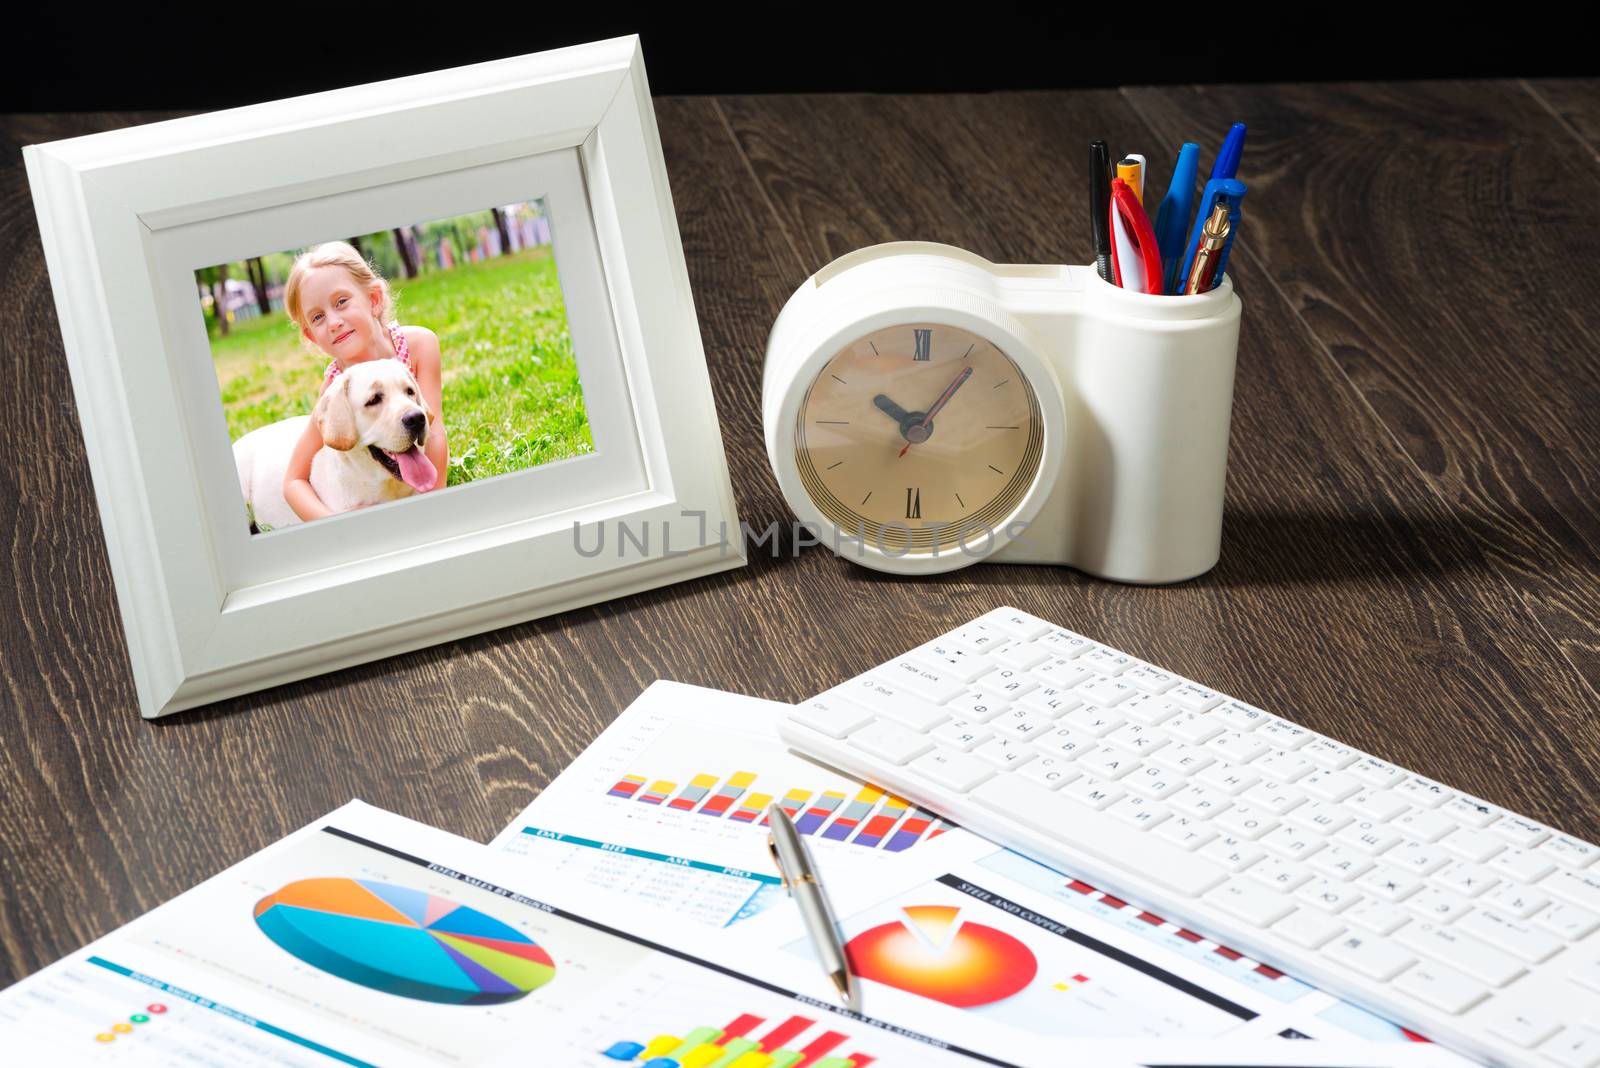 photo frame, business papers with financial charts. Workplace of the businessman.